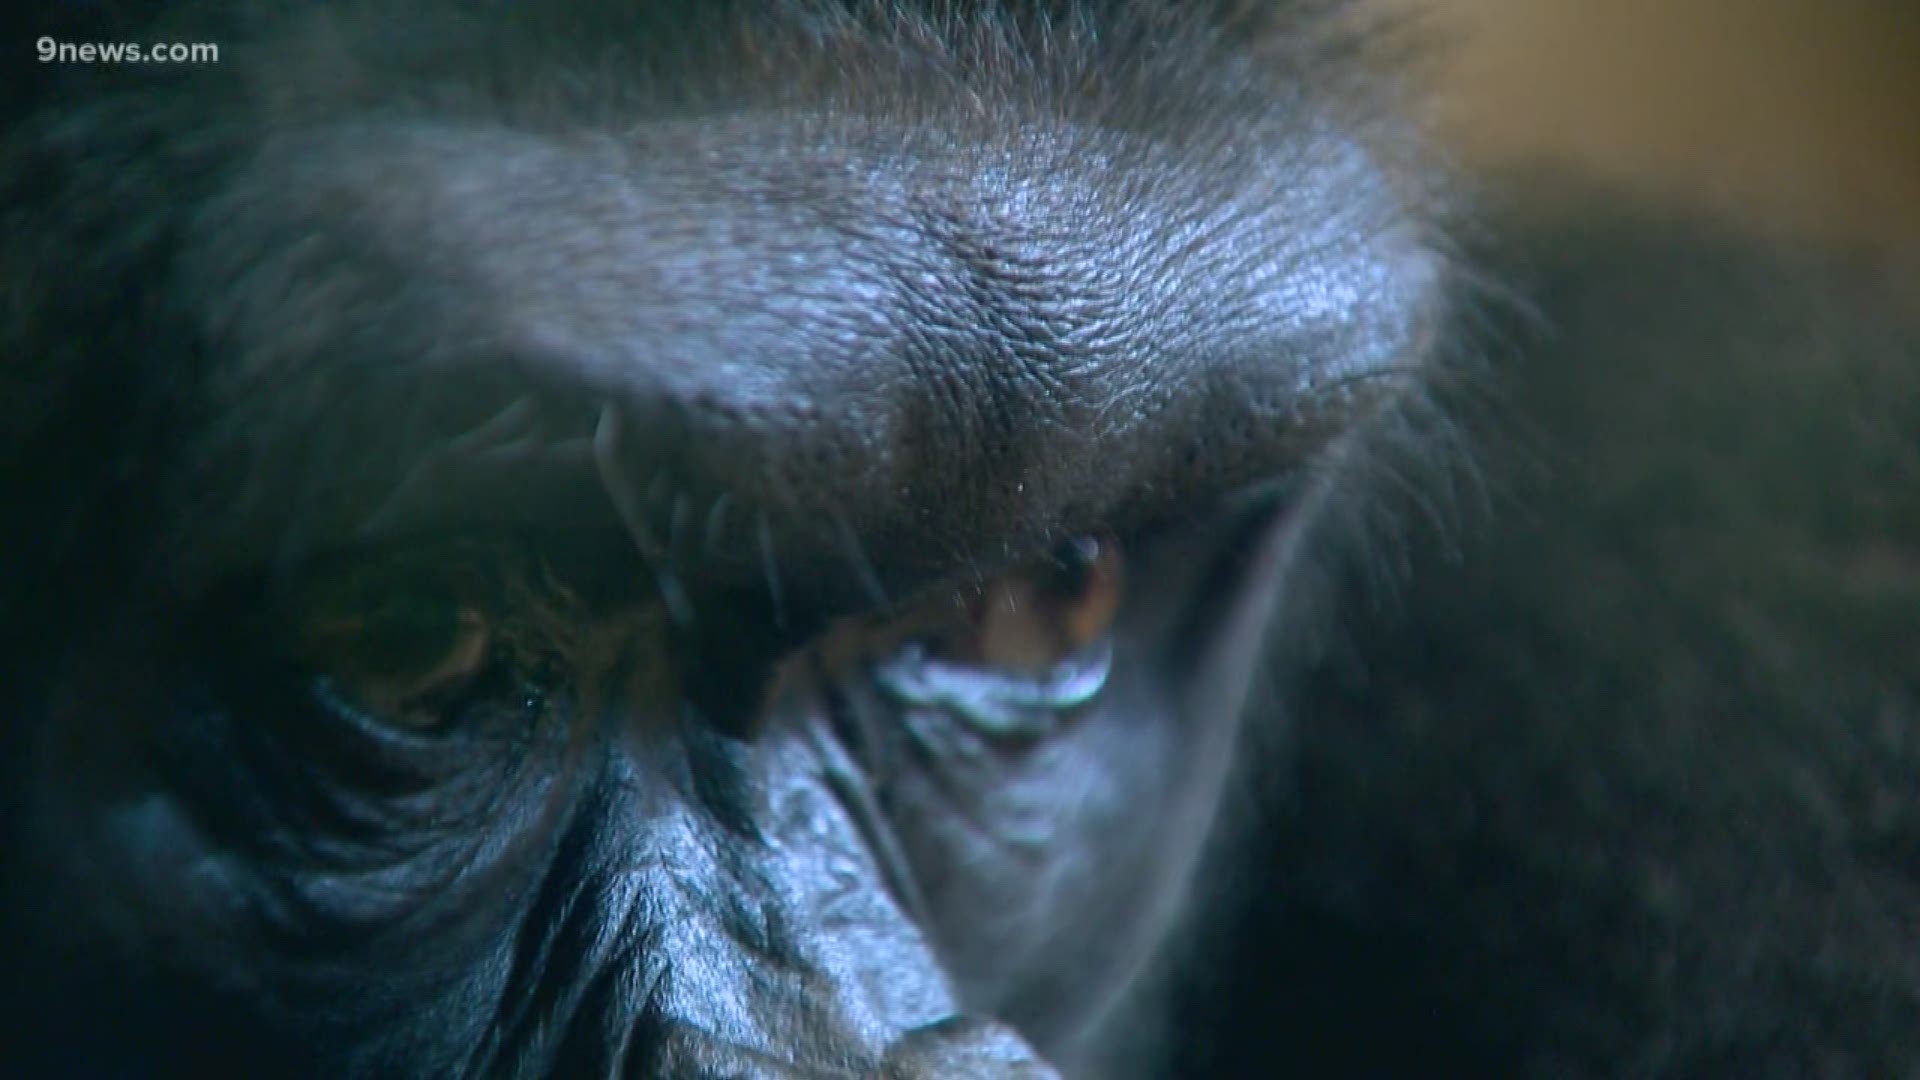 Three of the Denver Zoo's gorillas have been sent to Jacksonville to find love.